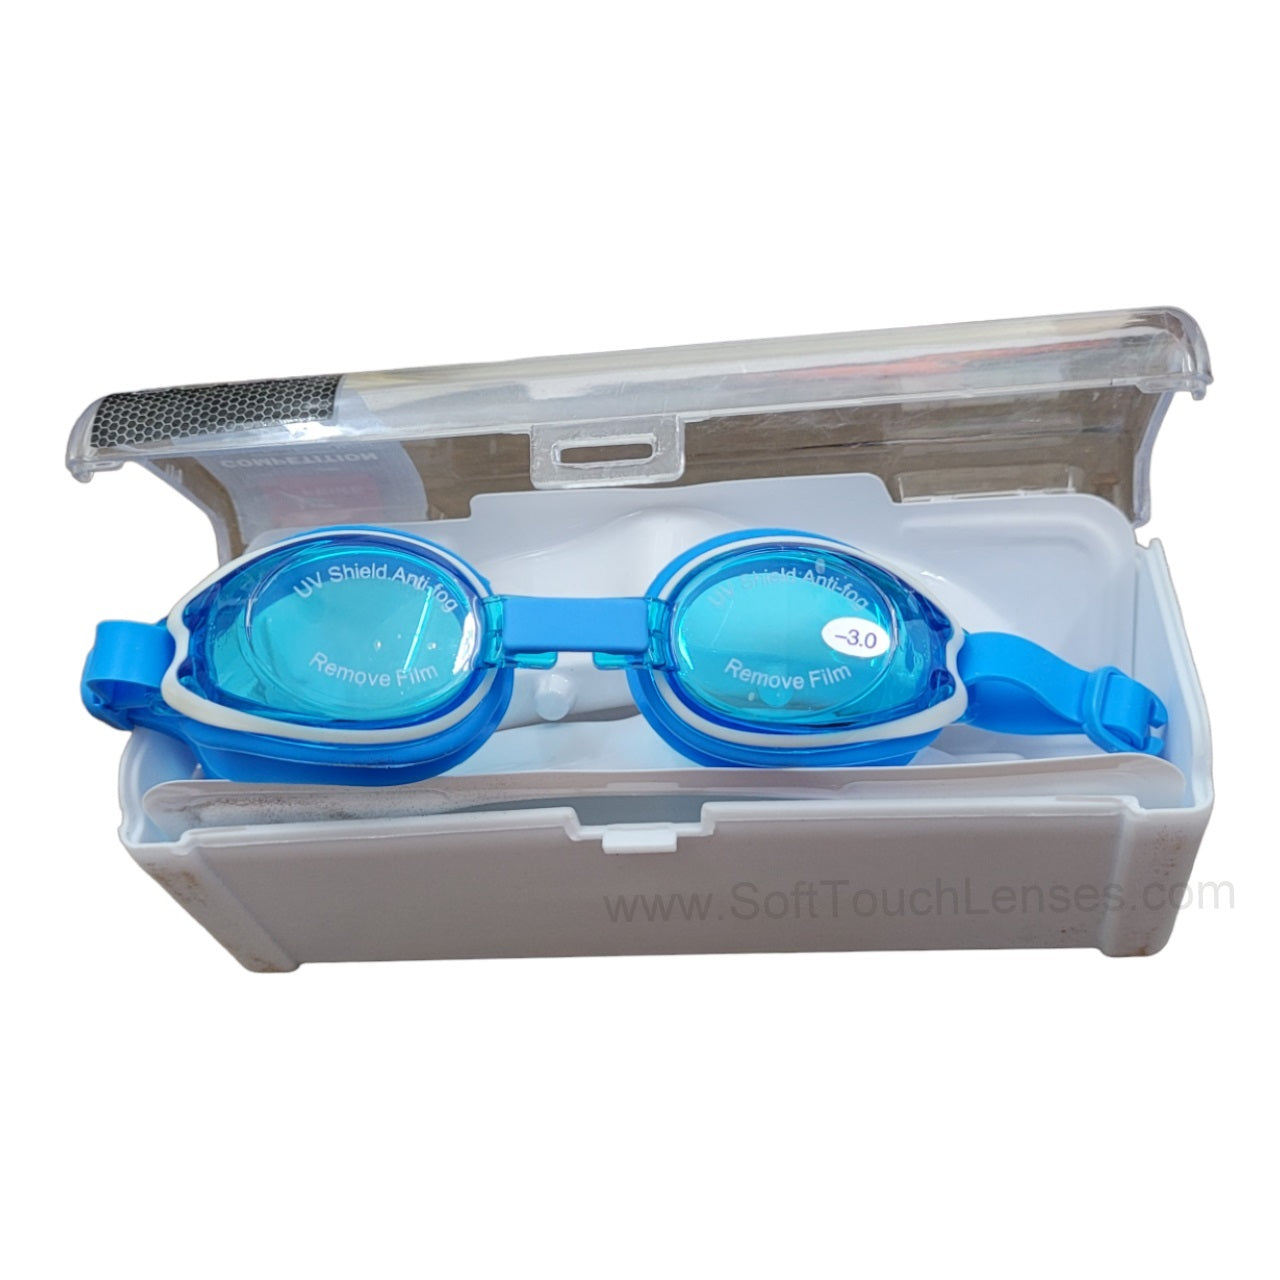 Kids Power Swimming Goggles Rx Prescription Optical Corrective Lenses with UV Protection, Anti-Fog ( 3yr to 8yr )